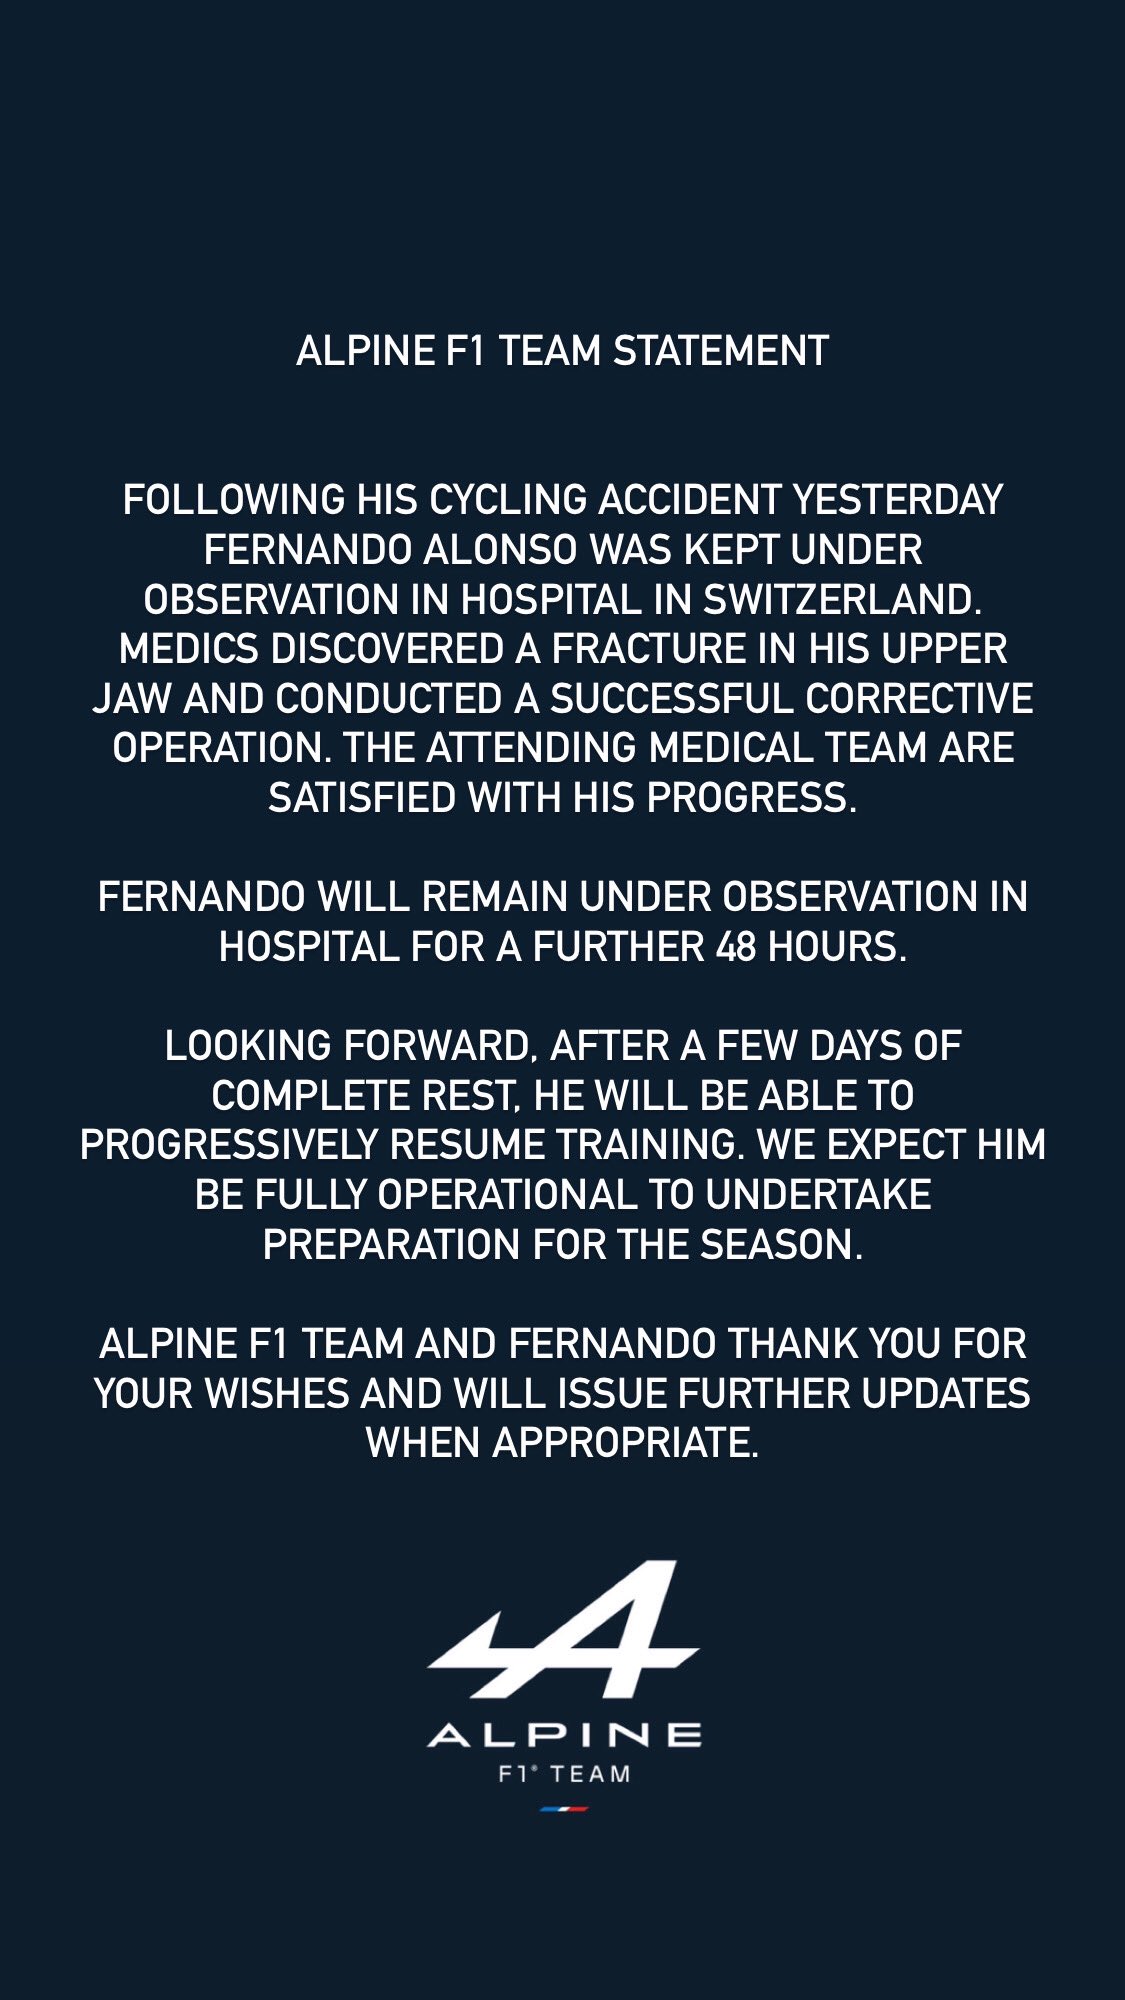 Alpine F1 Team Statement Following his cycling accident yesterday Fernando Alonso was kept under observation in hospital in Switzerland. Medics discovered a fracture in his upper jaw and conducted a successful corrective operation. The attending medical team are satisfied with his progress. Fernando will remain under observation in hospital for a further 48 hours. Looking forward, after a few days of complete rest, he will be able to progressively resume training. We expect him be fully operational to undertake preparation for the season. Alpine F1 Team and Fernando thank you for your wishes and will issue further updates when appropriate.